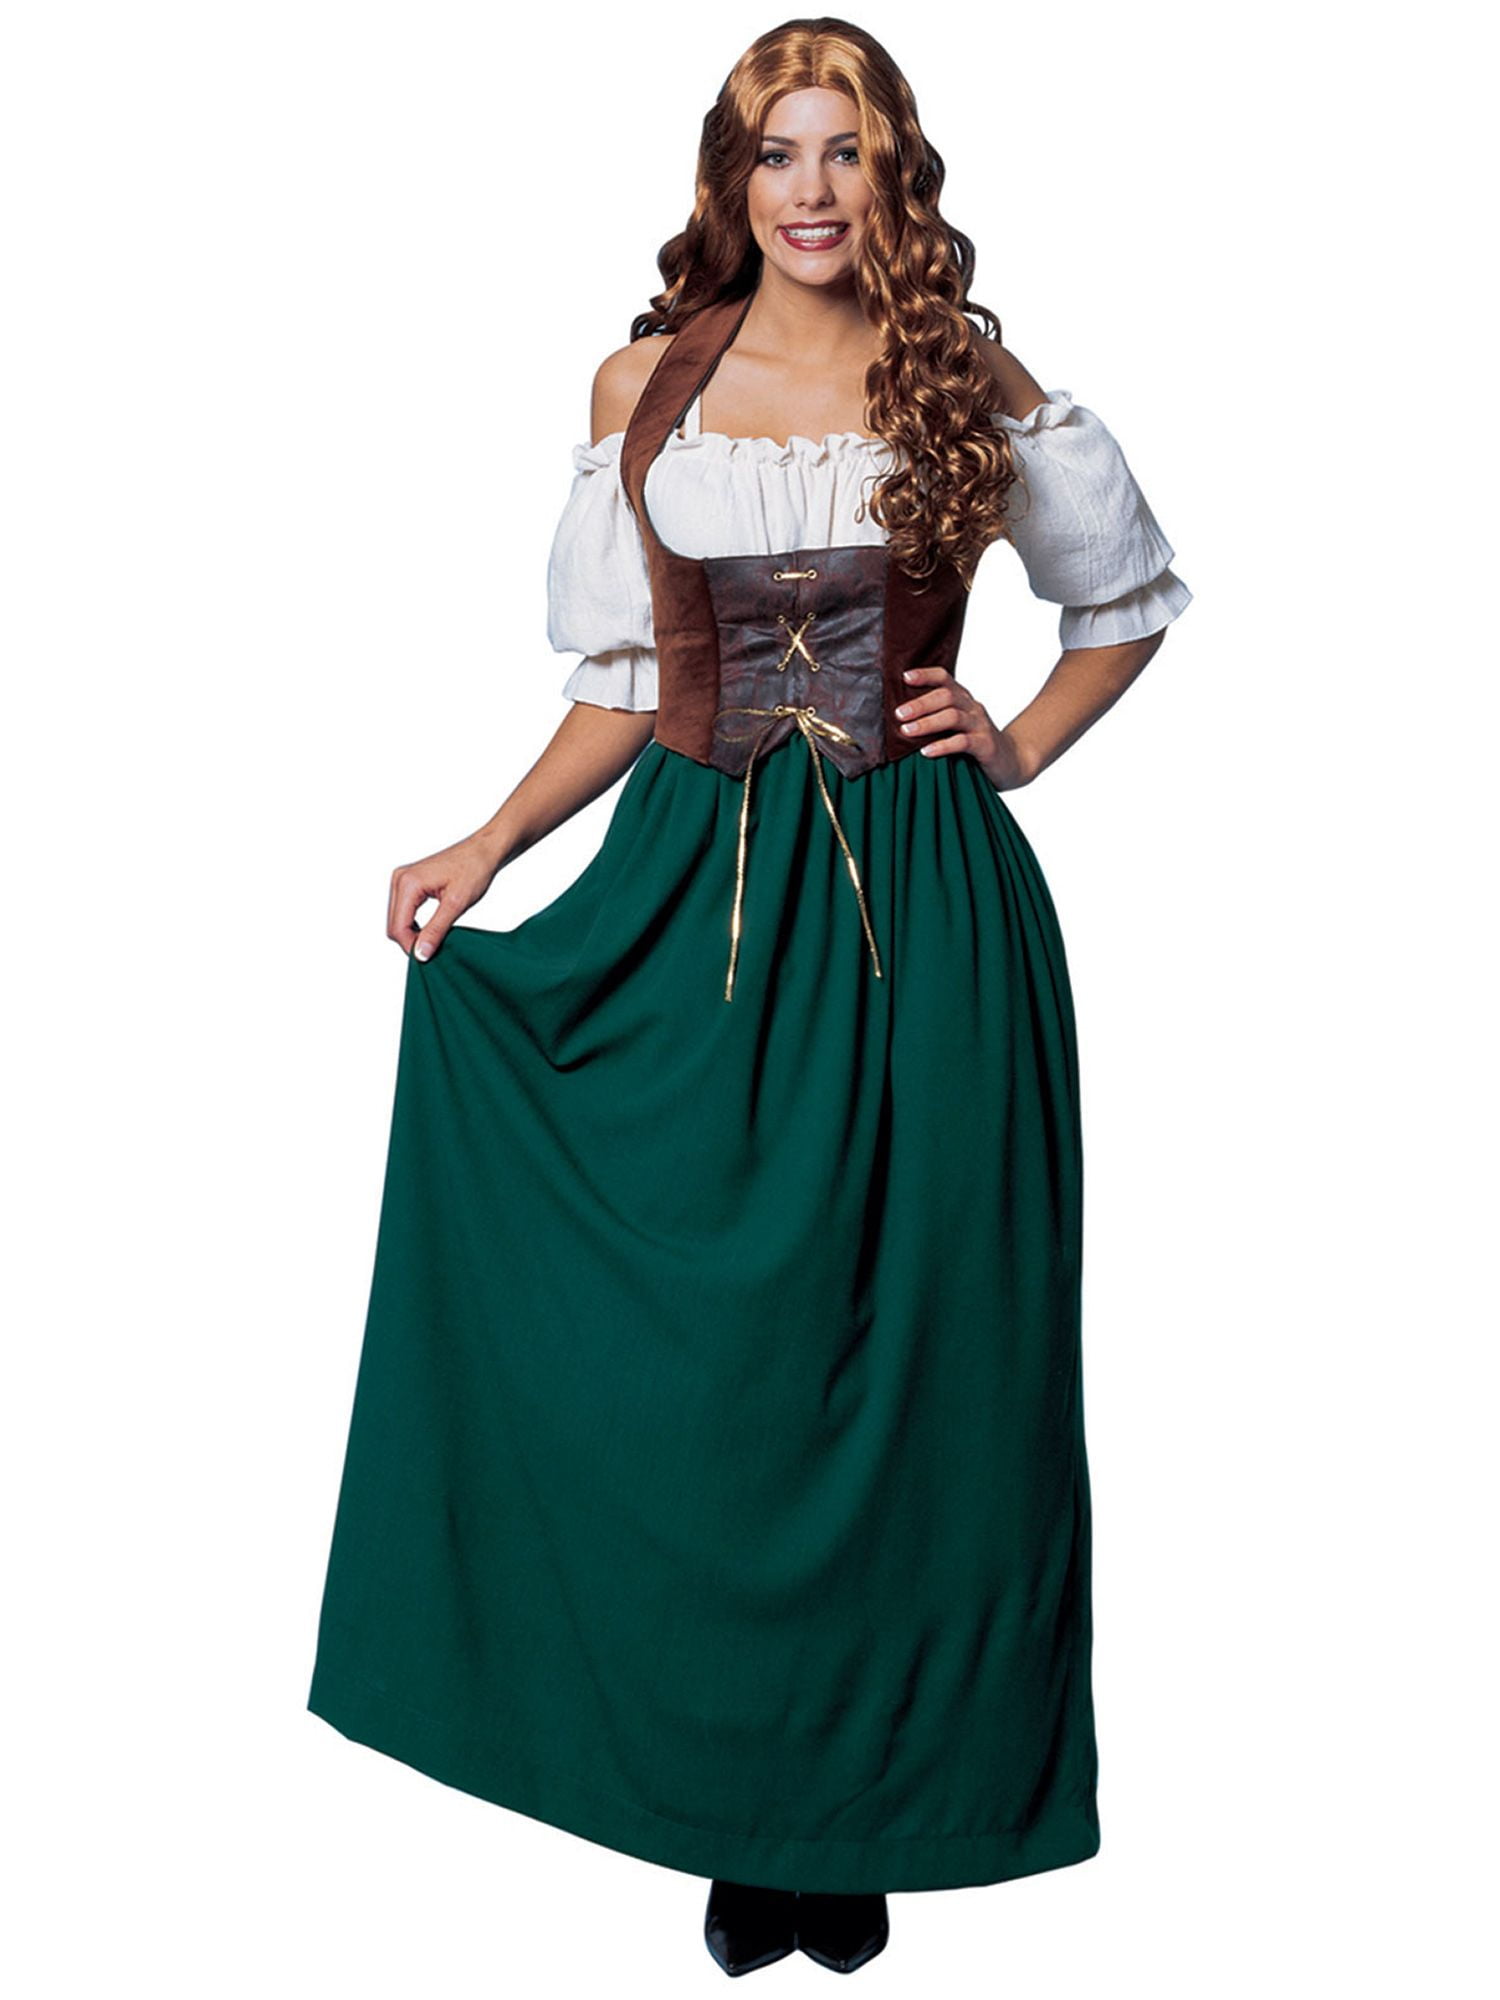 peasant medieval women's clothing